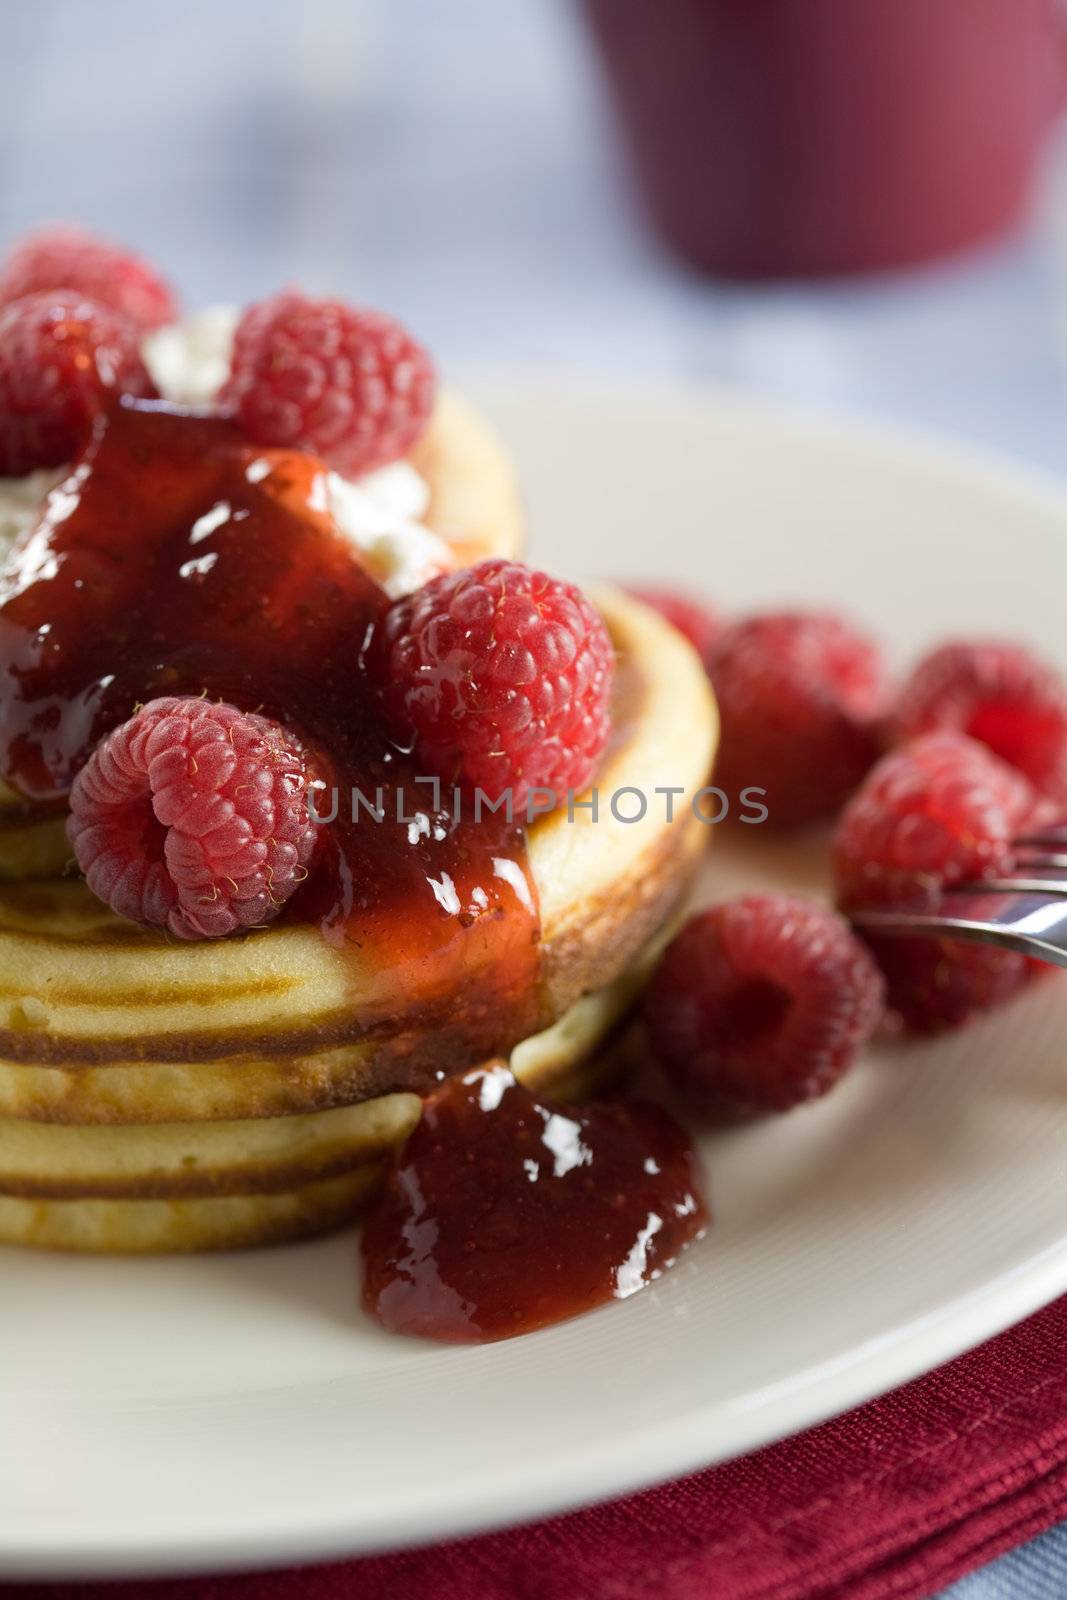 Delicious stack of pancakes served with raspberries